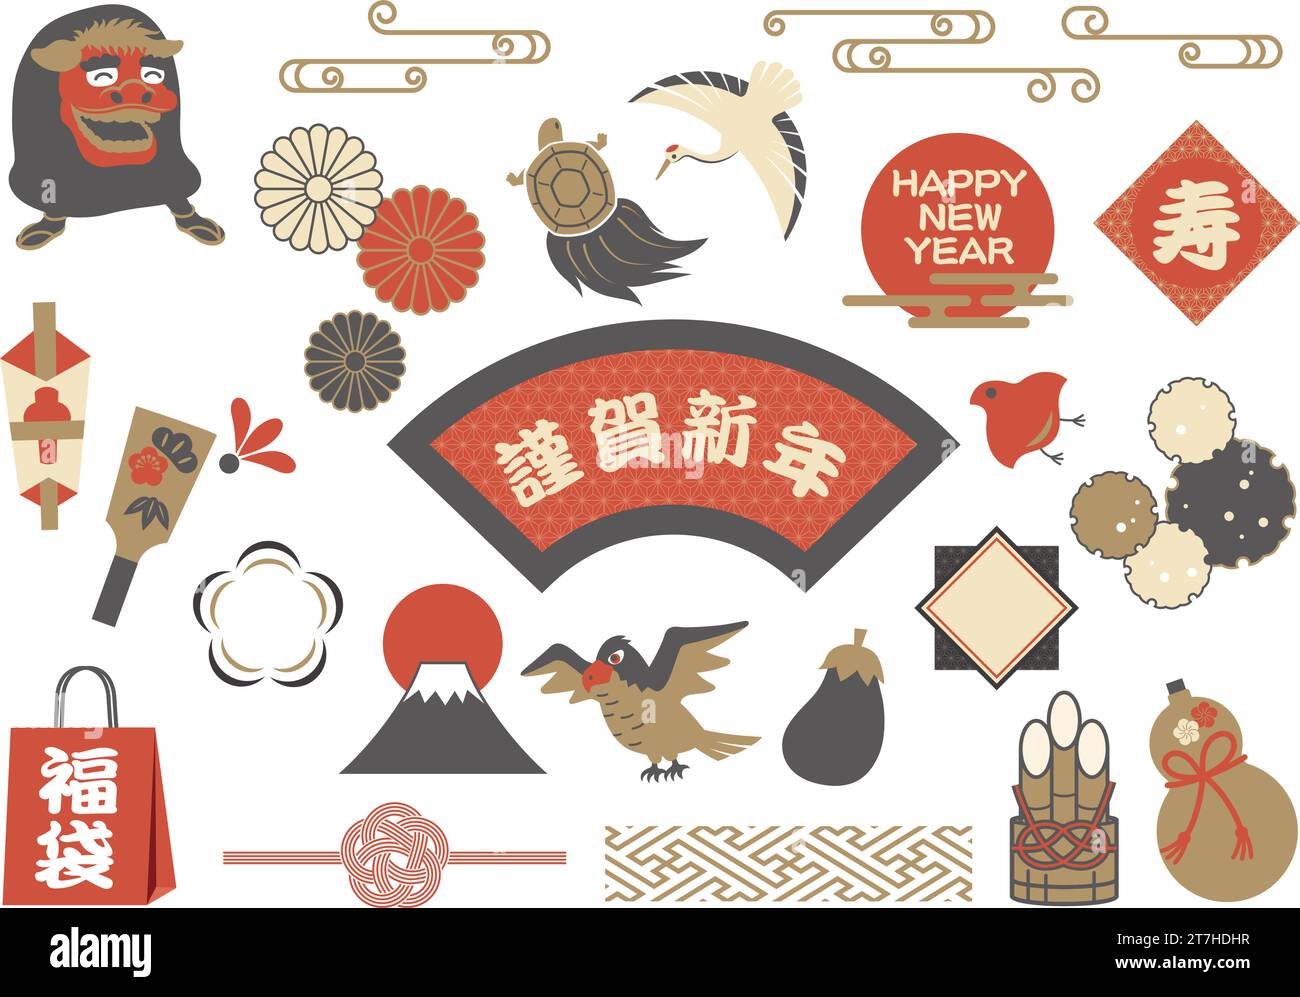 Japanese New Year’s Greetings Vector Vintage Element Set Isolated On A White Background. Text Translation - Happy New Year. New Year’s Da Stock Vector